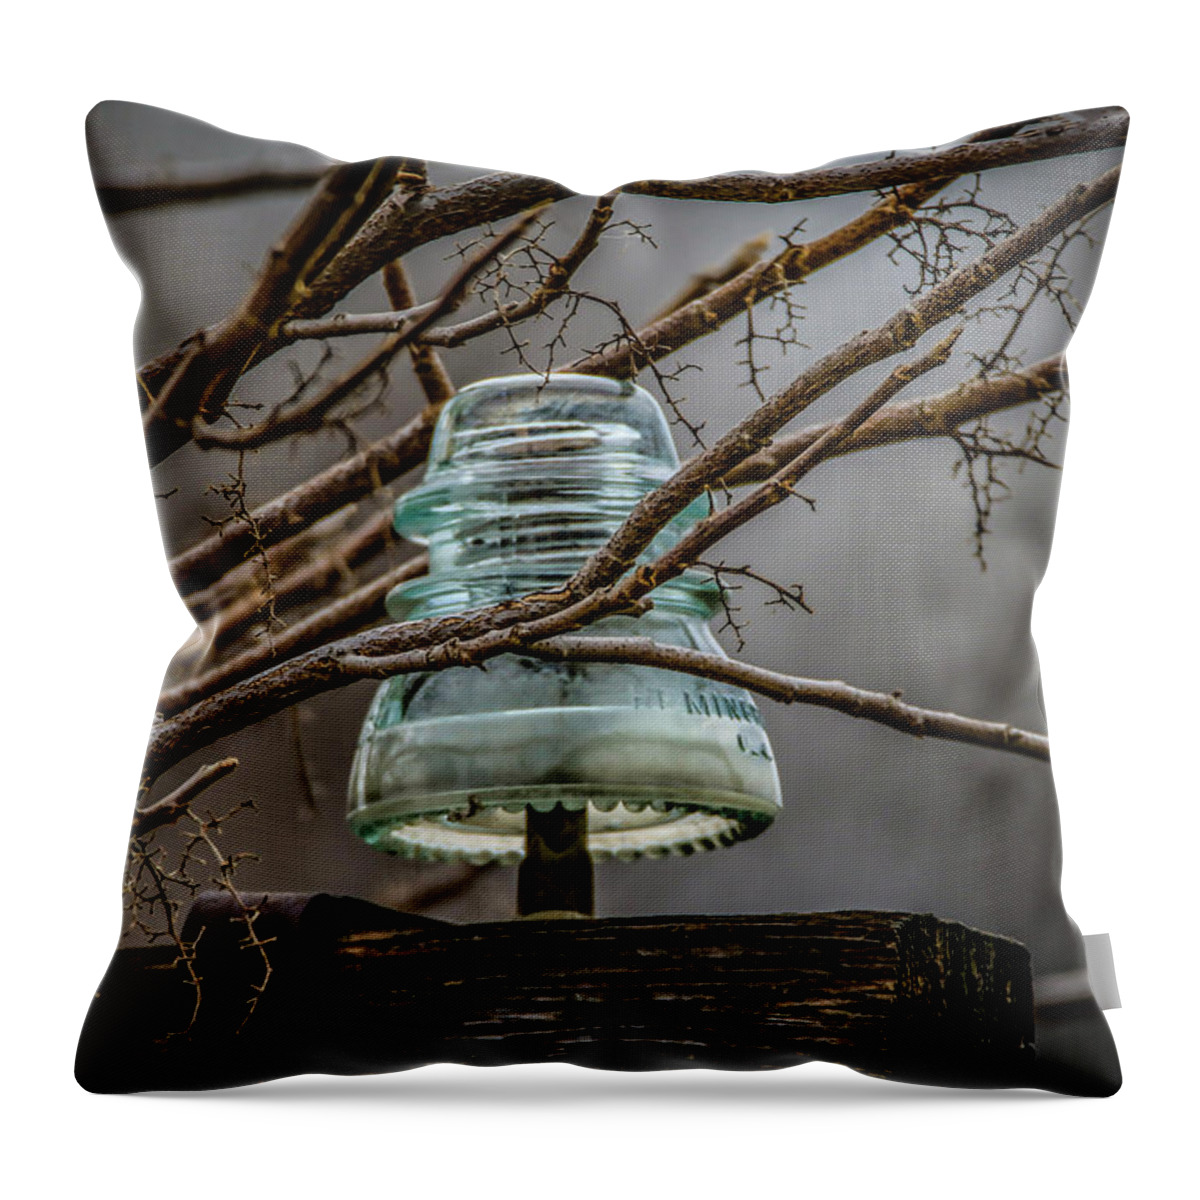 Glass Insulator Throw Pillow featuring the photograph Old Glass Insulator by Ray Congrove